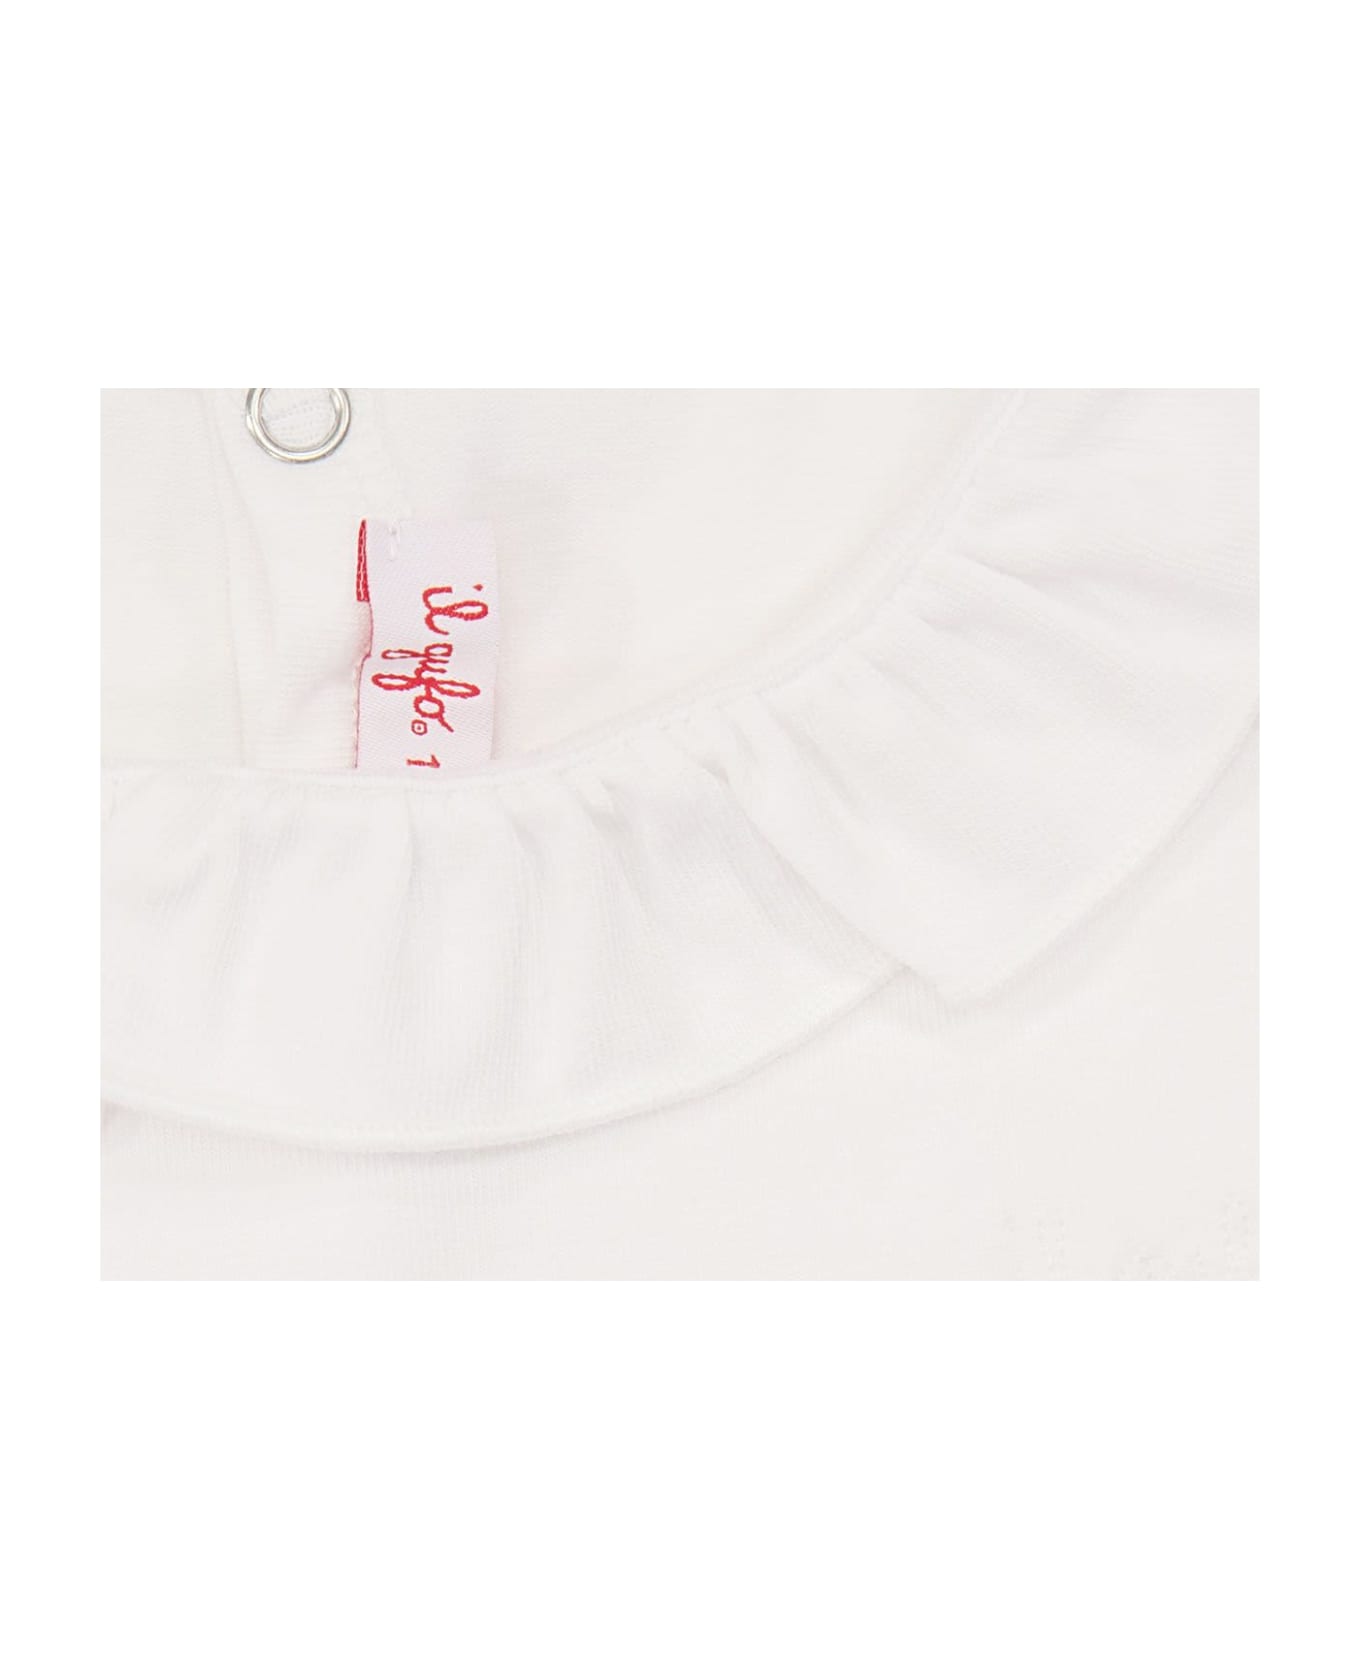 Il Gufo T-shirt With Ruffle Collar - White Tシャツ＆ポロシャツ